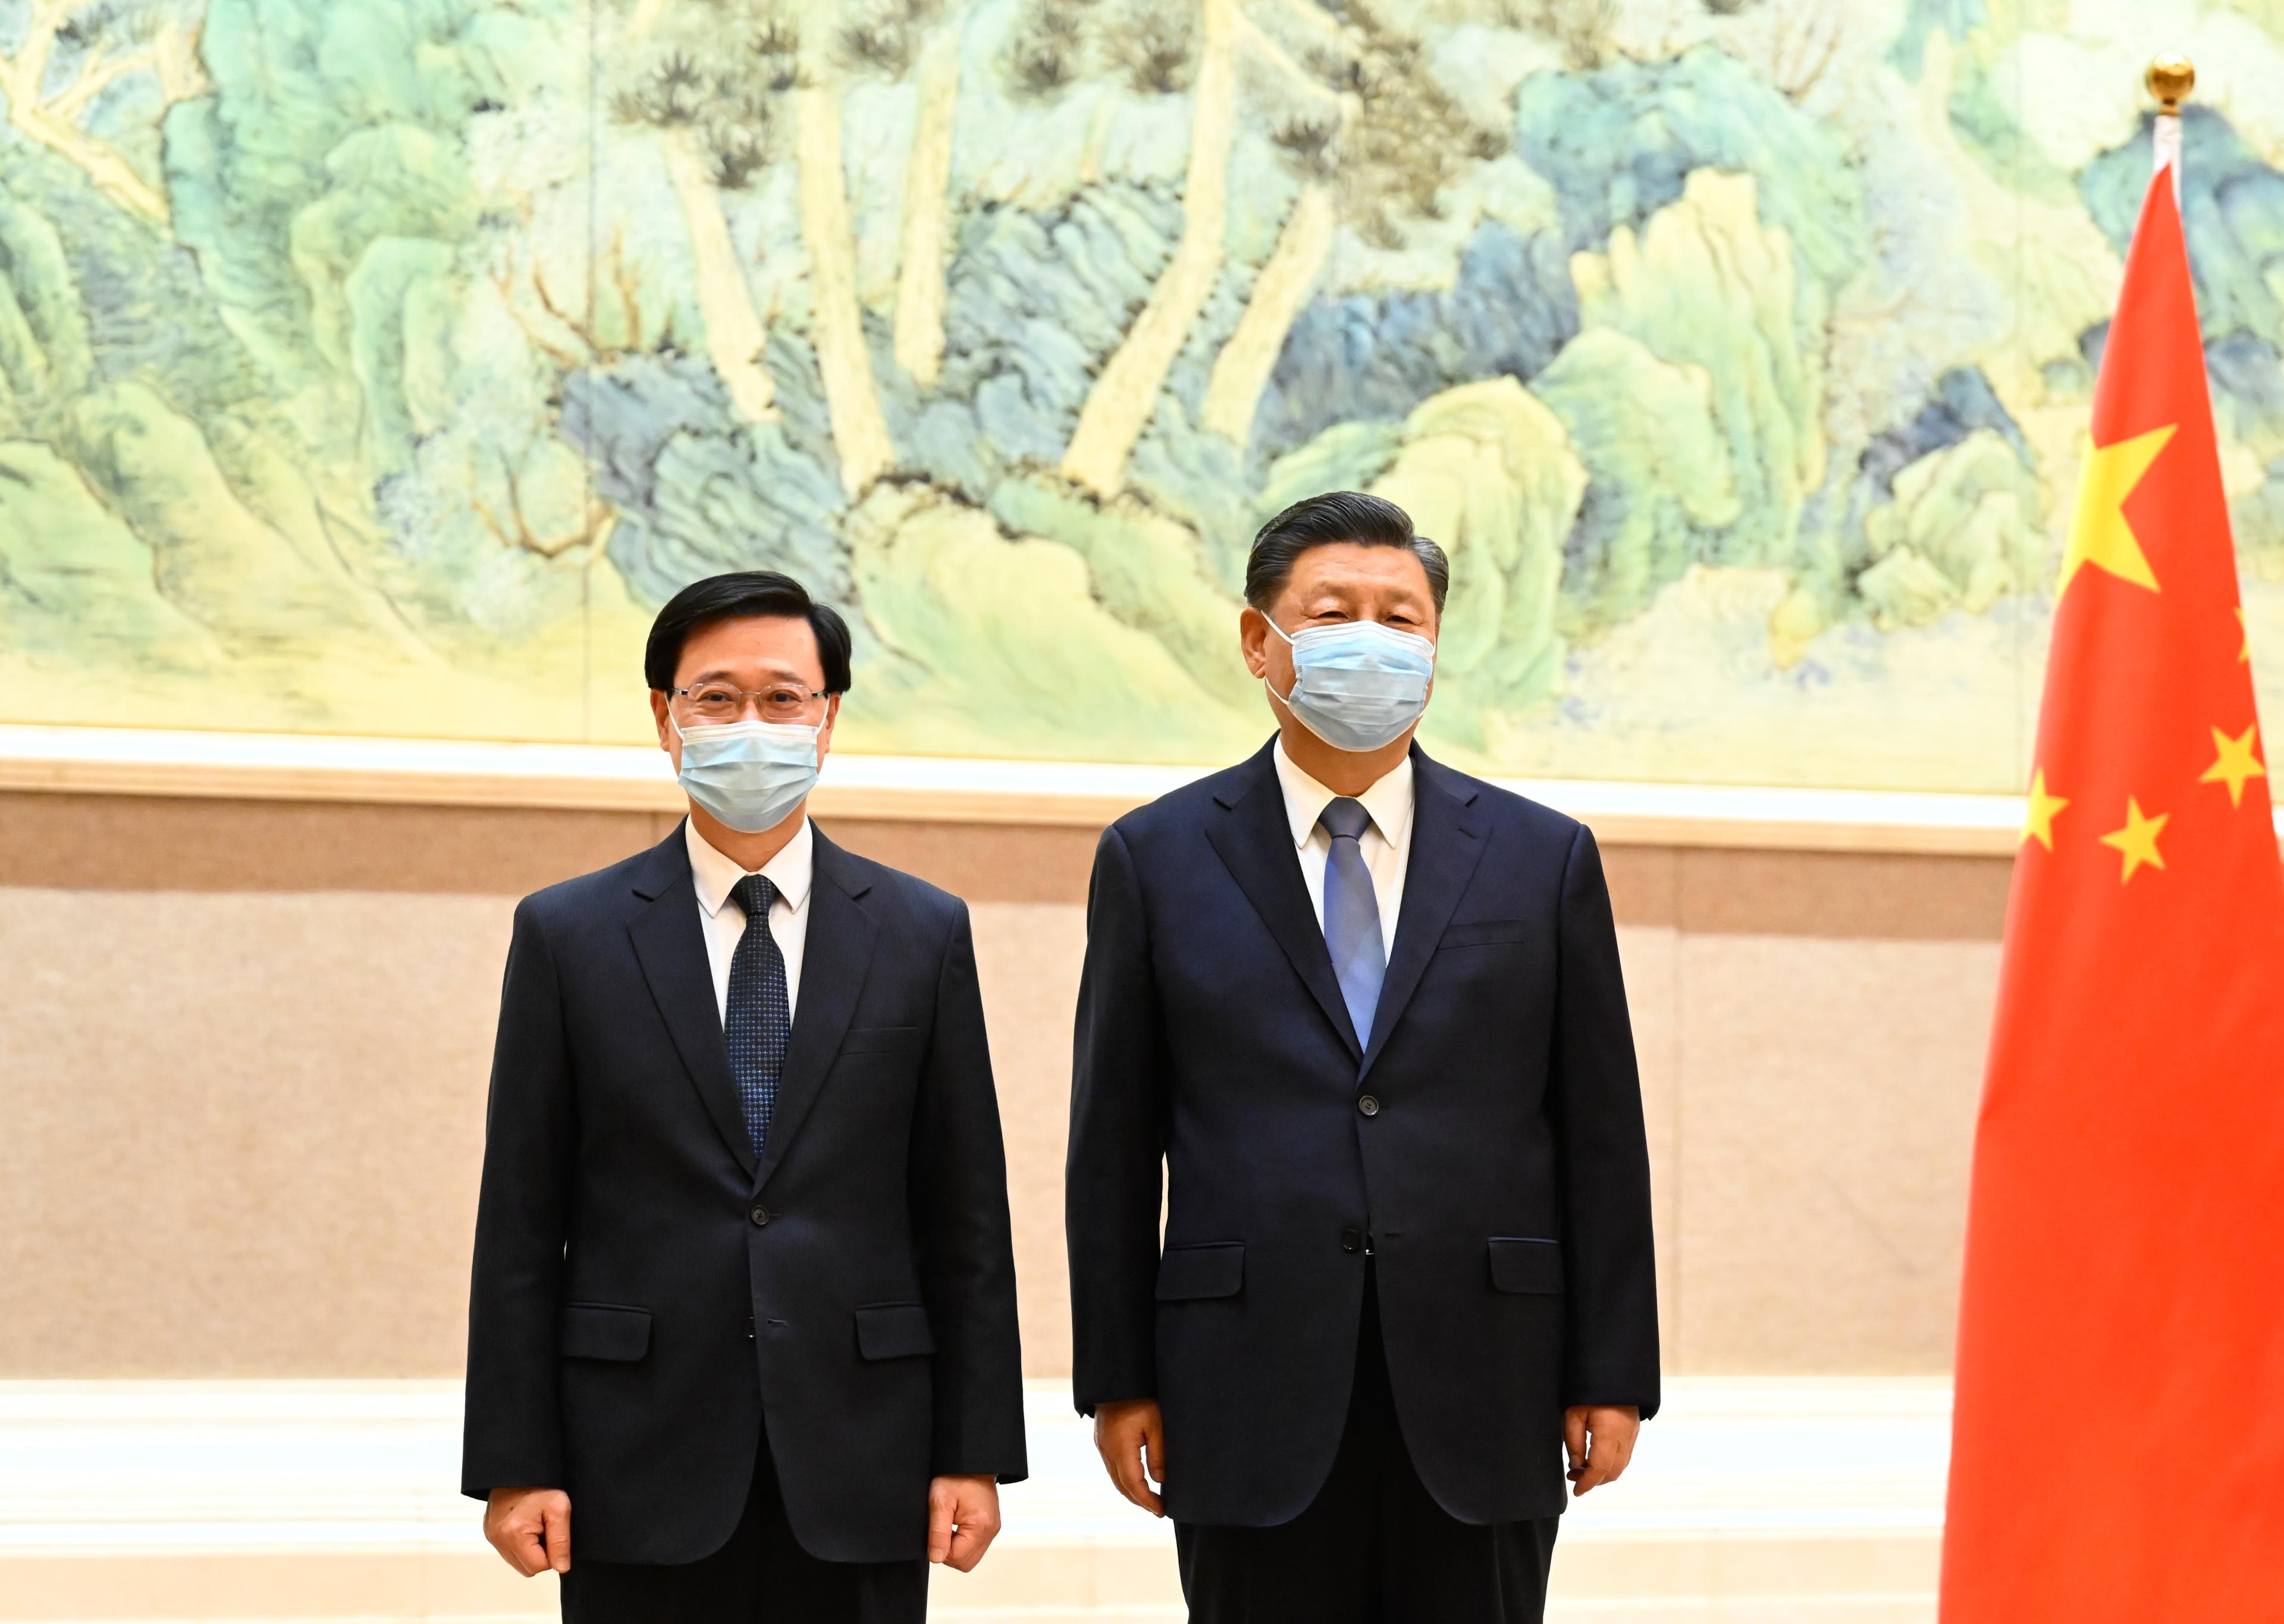 The Chief Executive-elect, Mr John Lee (left), is received by President Xi Jinping (right) in Beijing today (May 30).